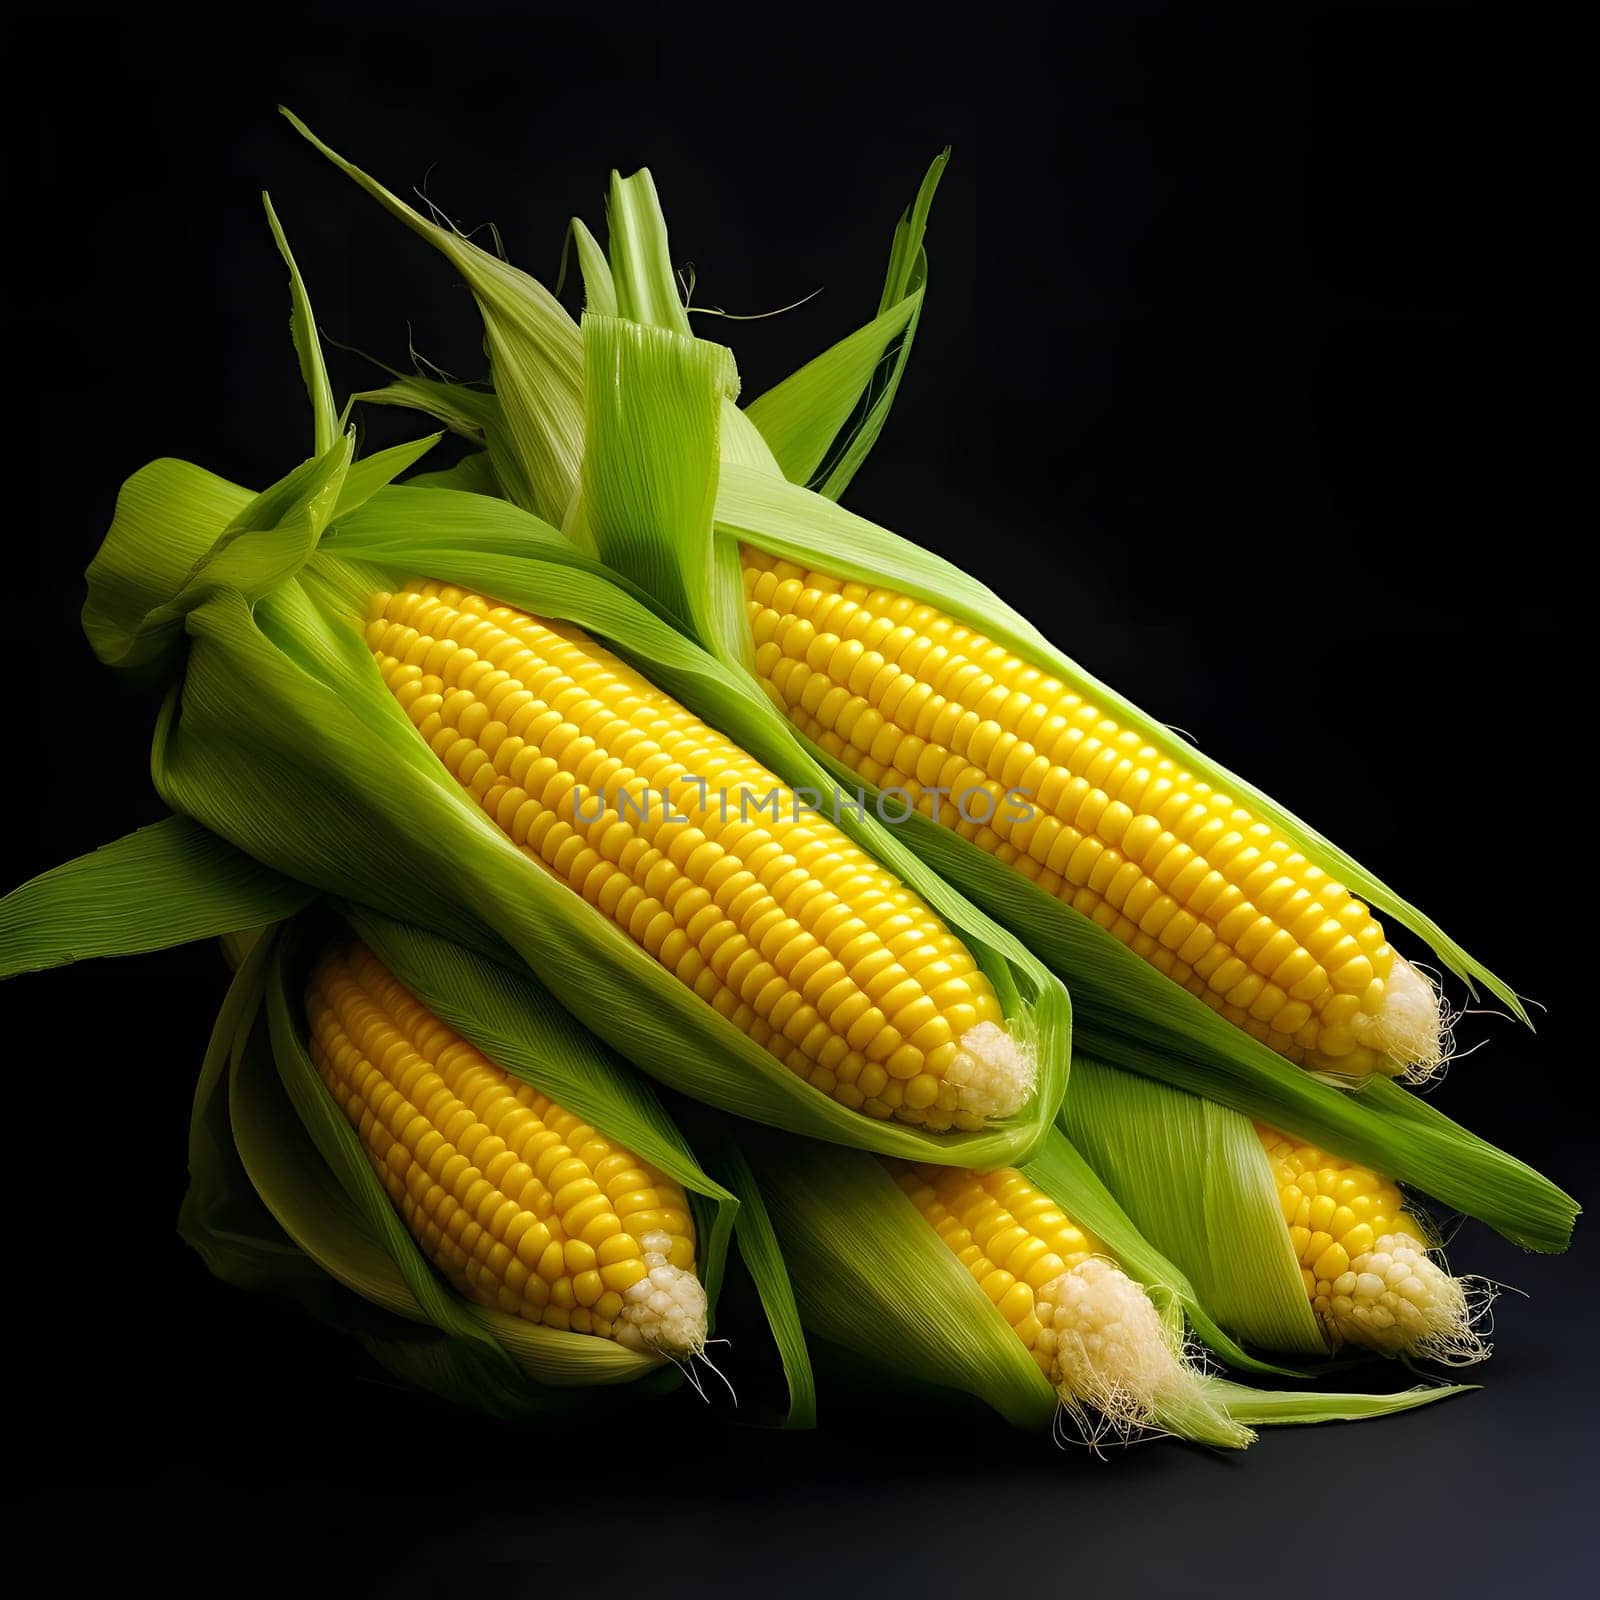 Five yellow corn cobs in leaf on black background isolated. Corn as a dish of thanksgiving for the harvest. An atmosphere of joy and celebration.